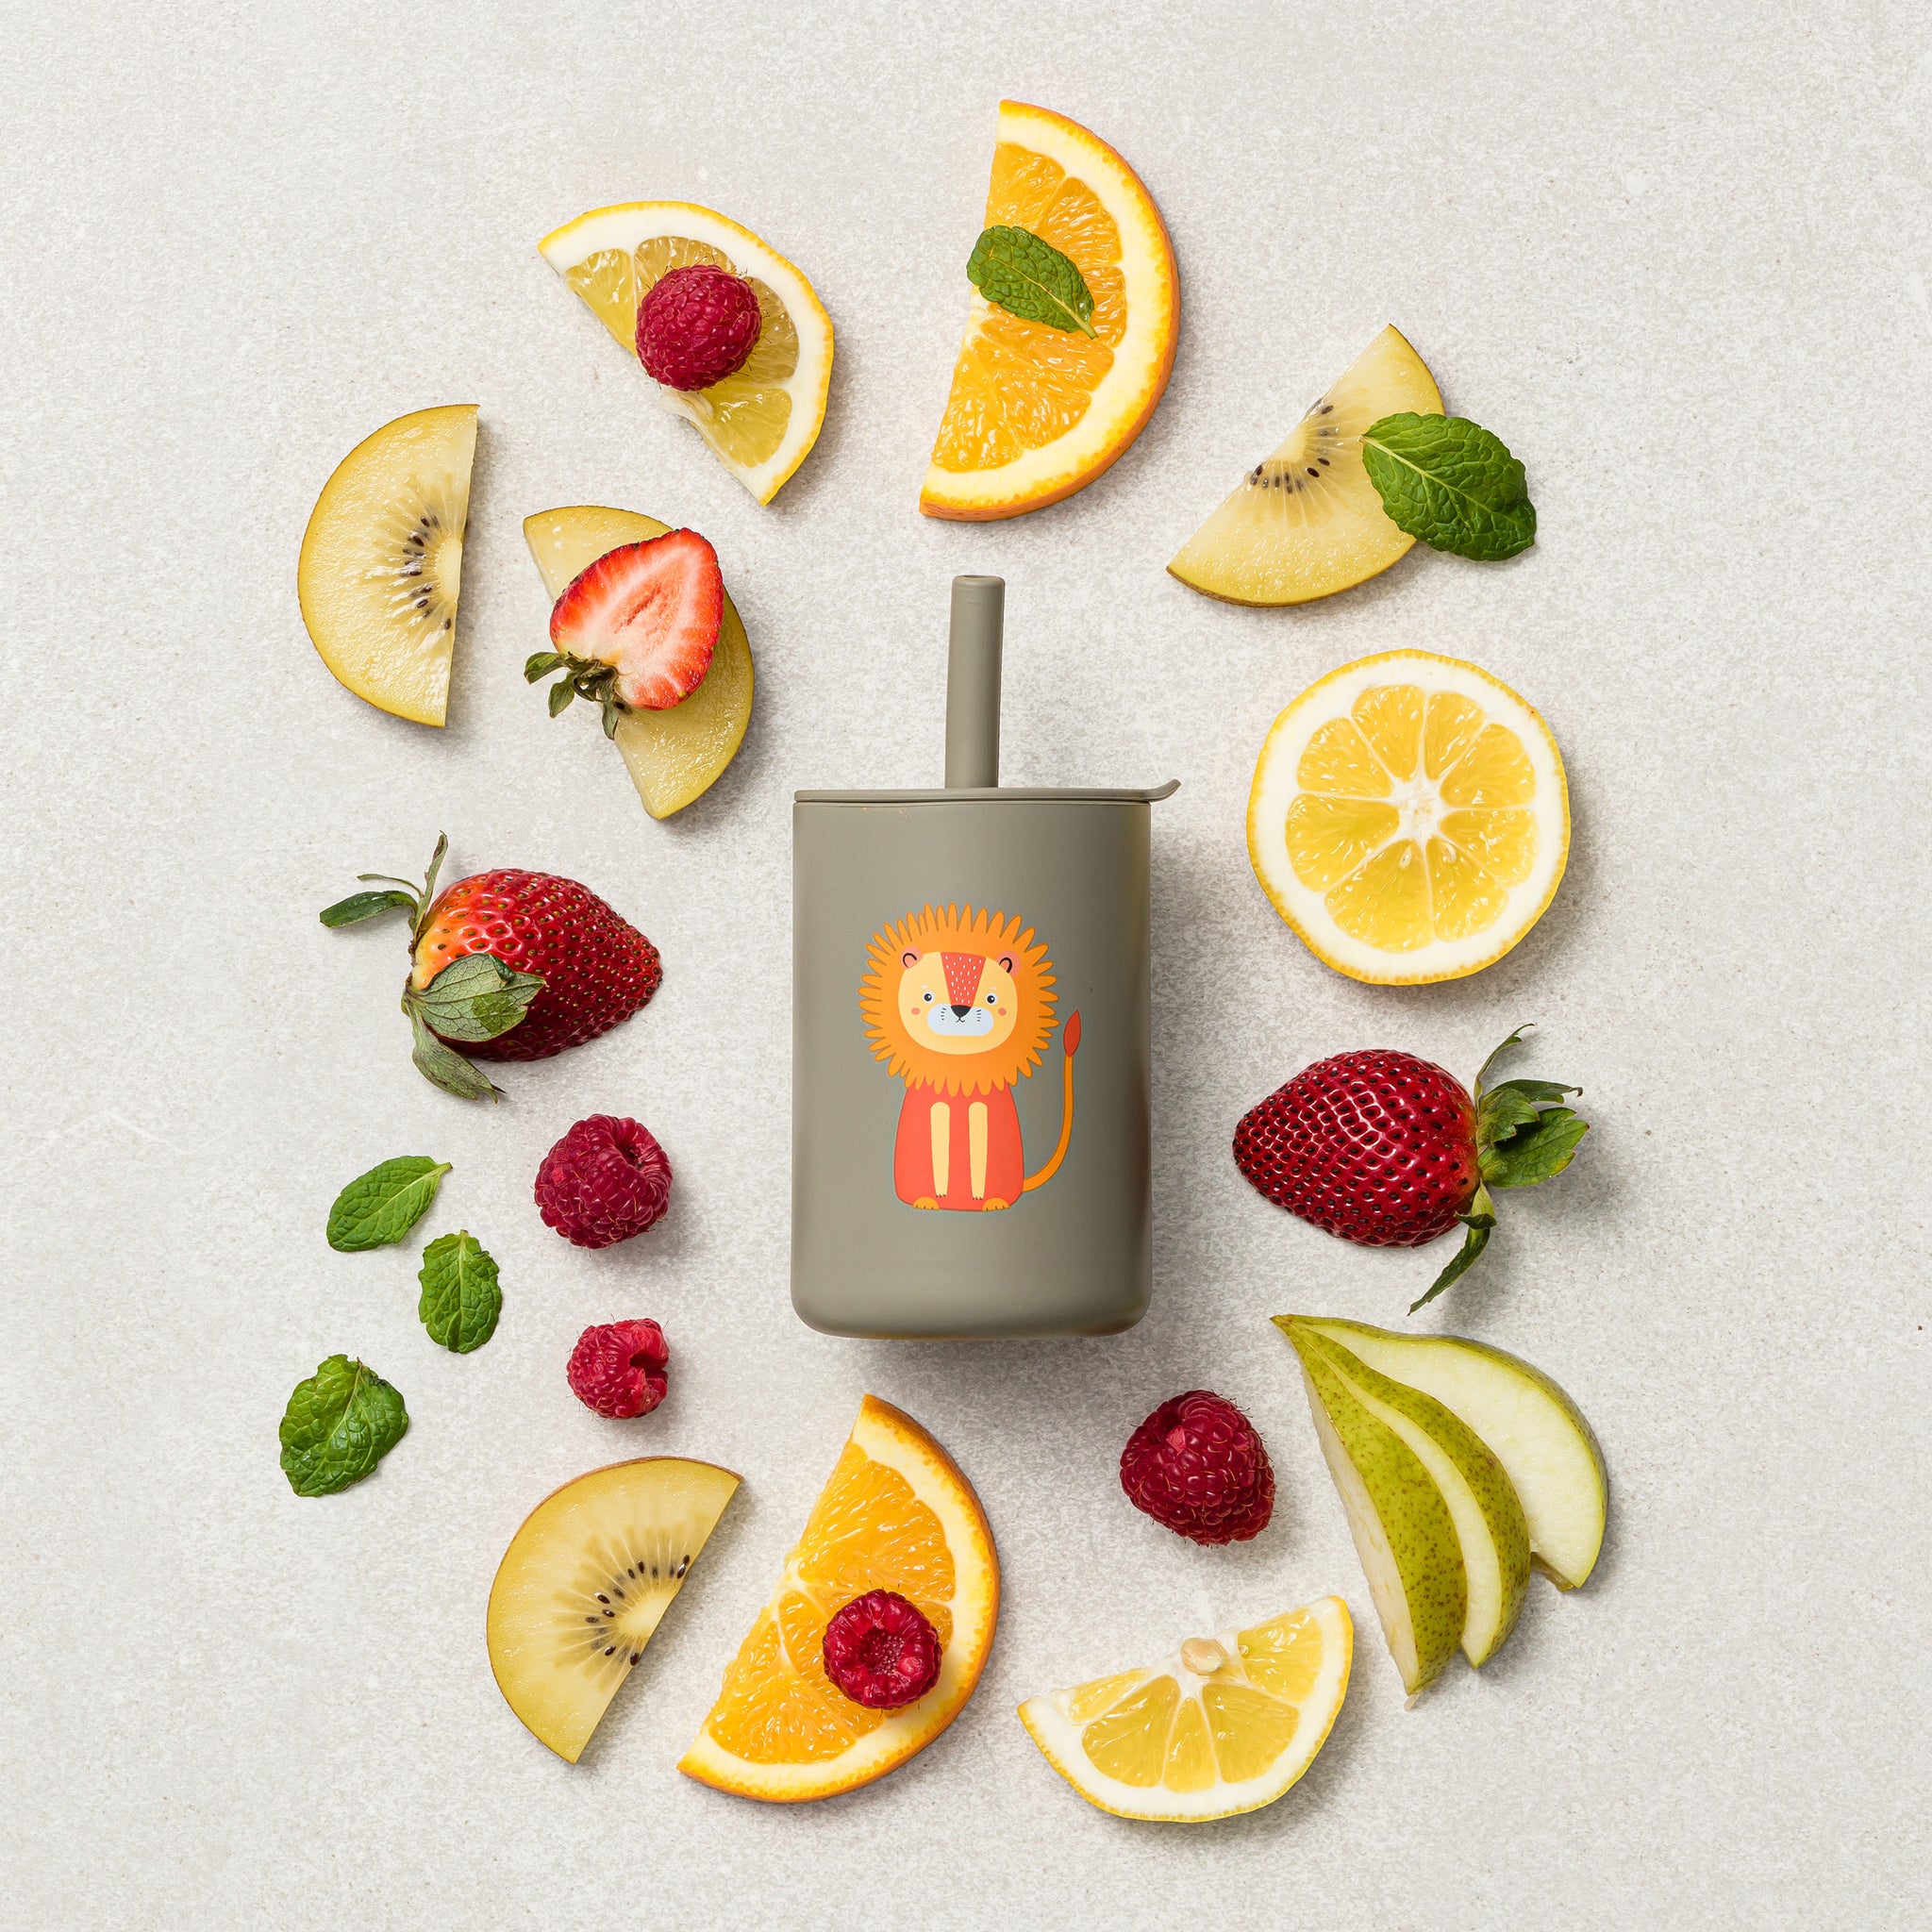 Over the Dandelions Mini Smoothie Cup Lion